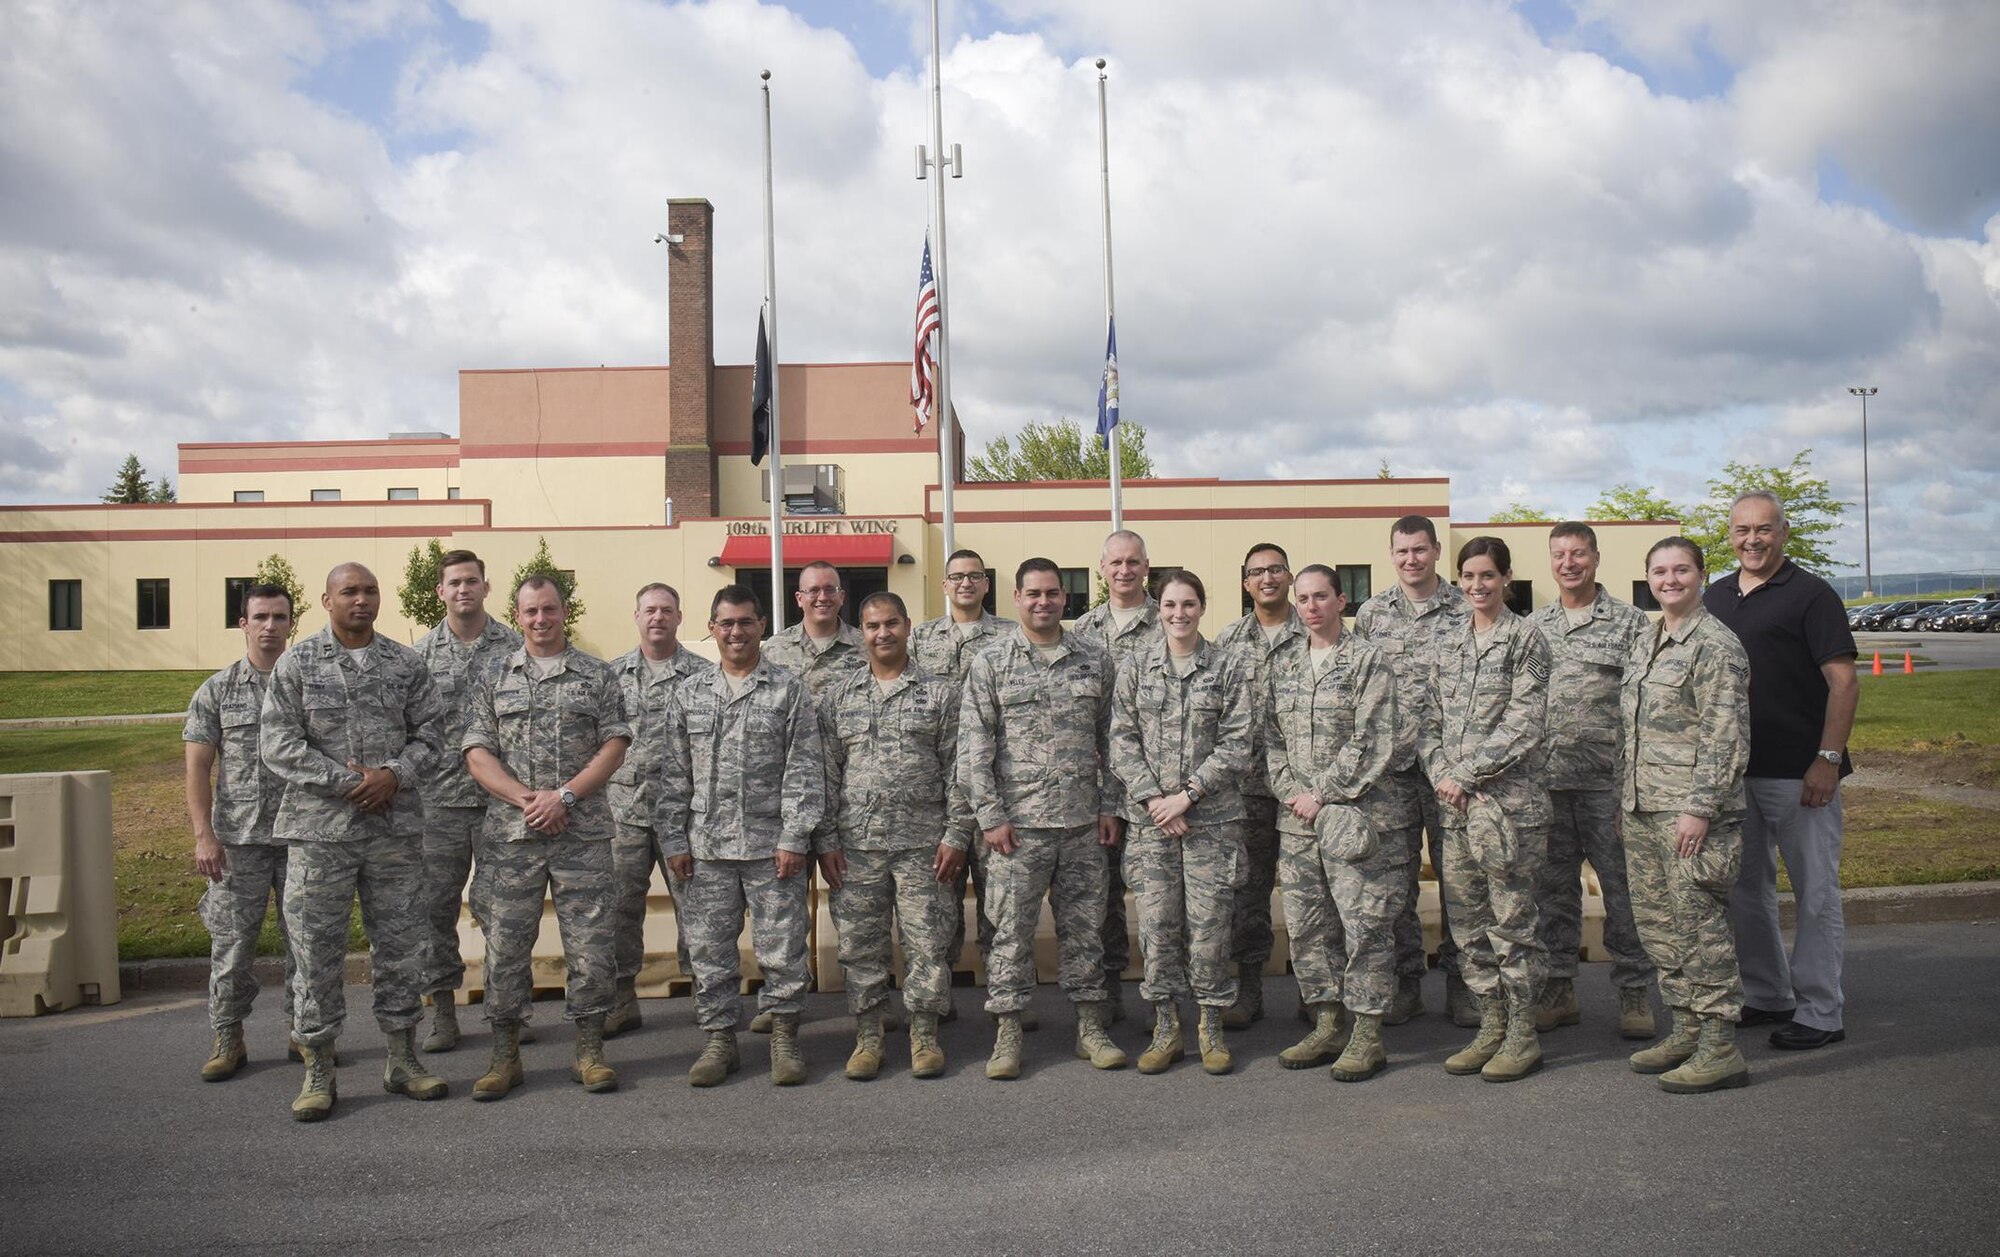 Eighteen Airmen from Air Mobility Command wings throughout the country convened at Stratton Air National Guard Base, Scotia, New York, on Aug. 22-24, 2017 to complete Patriot Excalibur (PEX) User Training